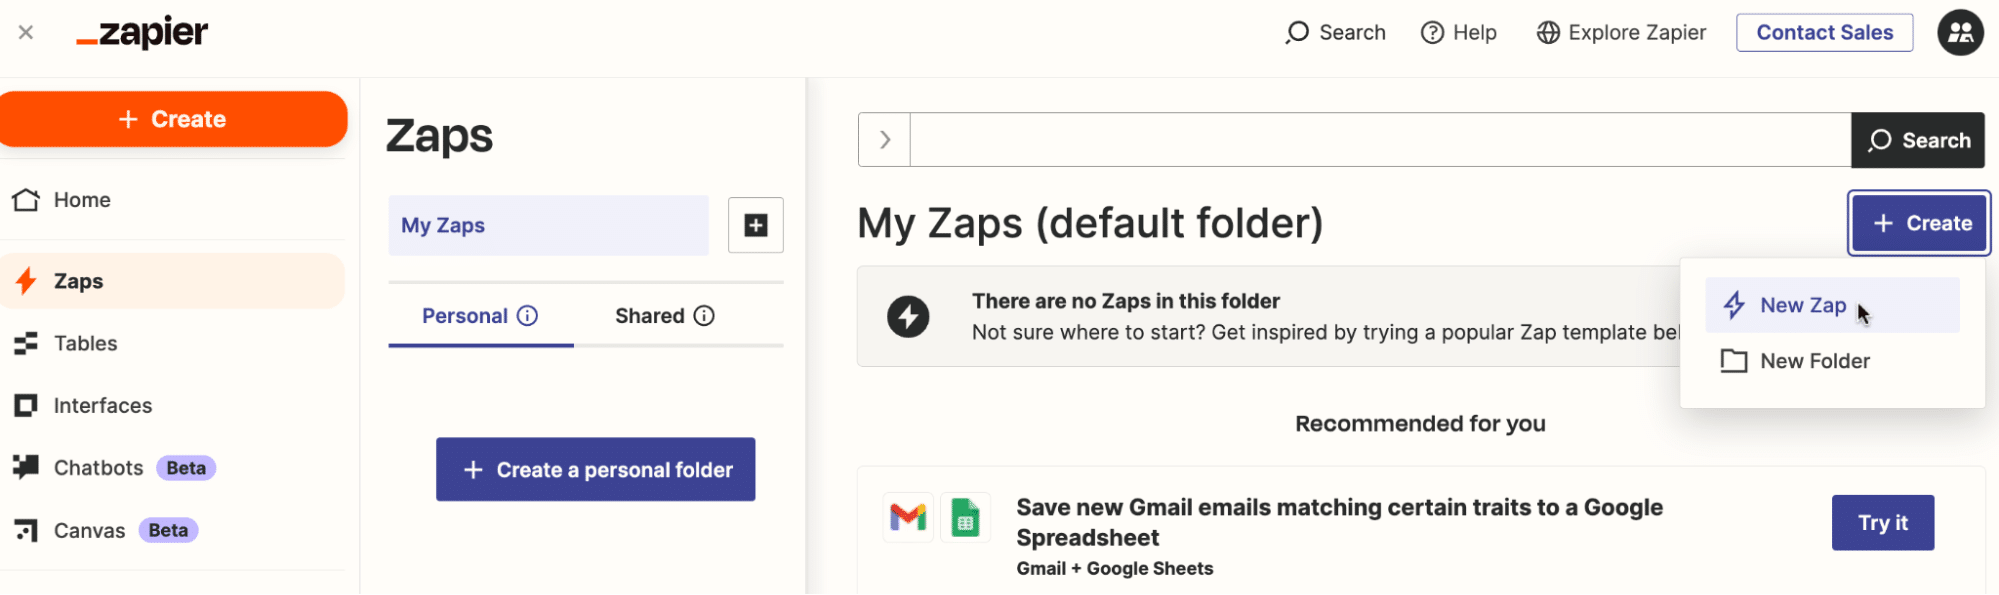 Initiating the setup of a new Zap by selecting '+ Create' > 'New Zap'.